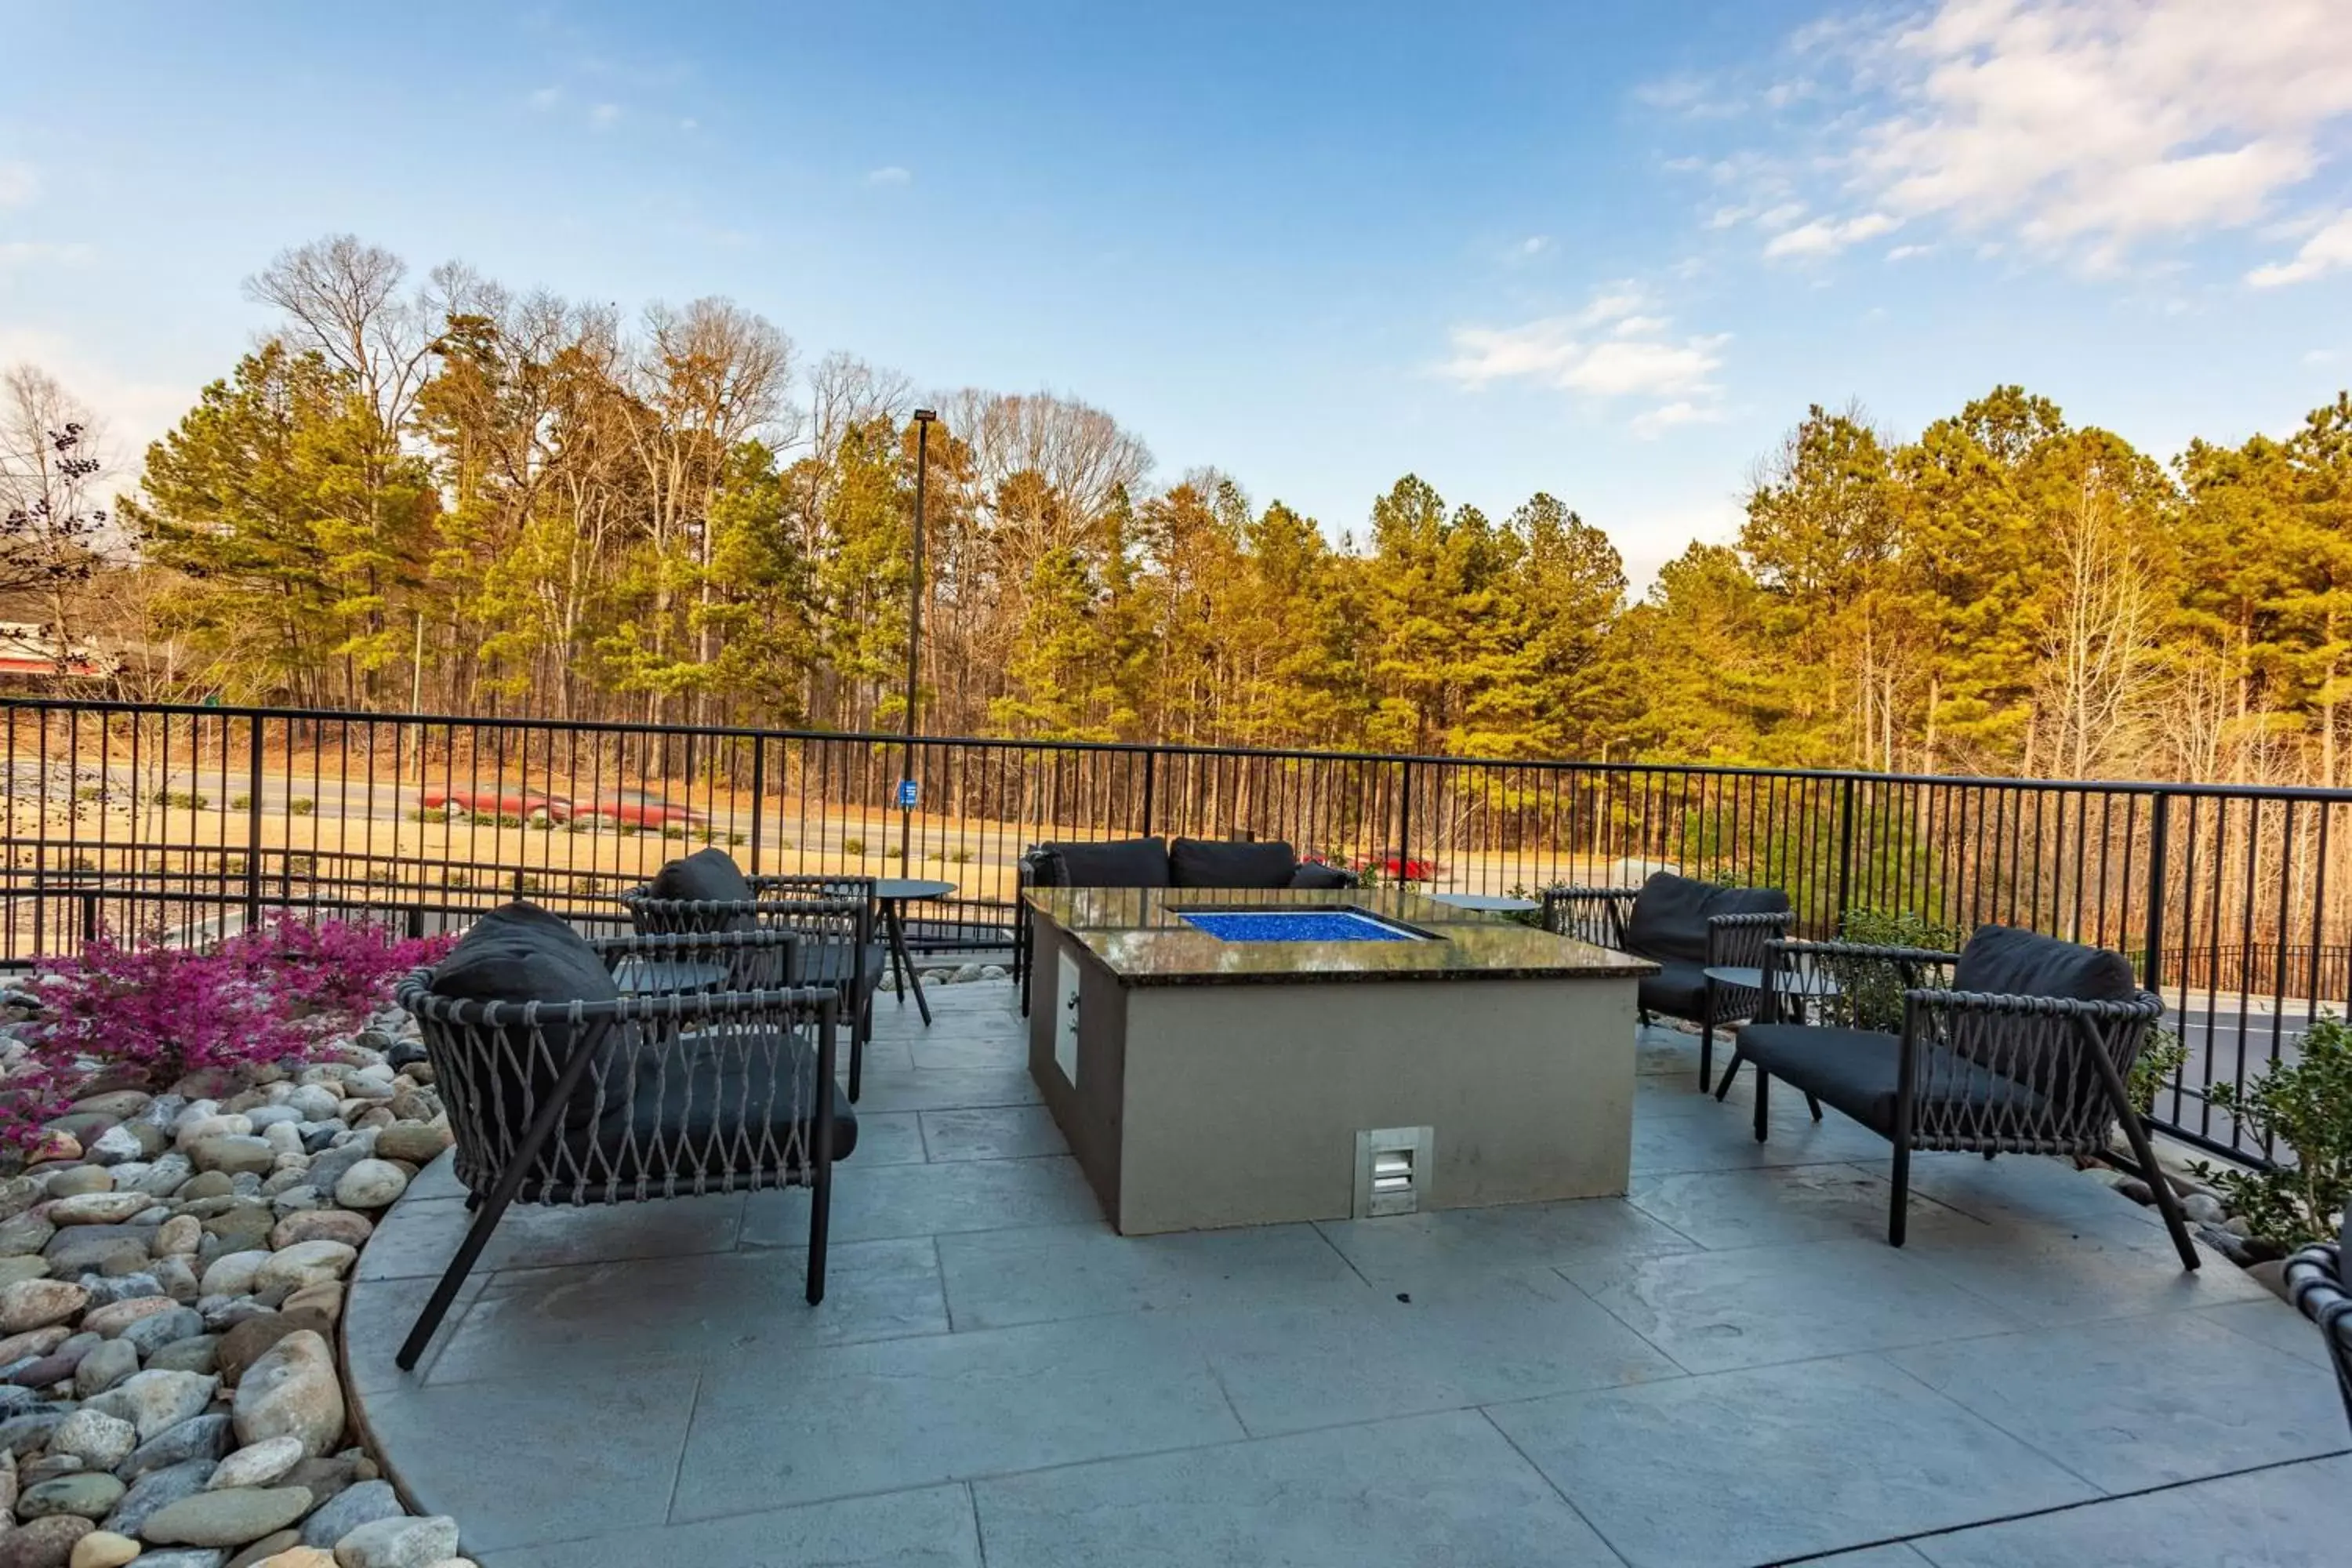 Property building in TownePlace Suites by Marriott Raleigh - University Area